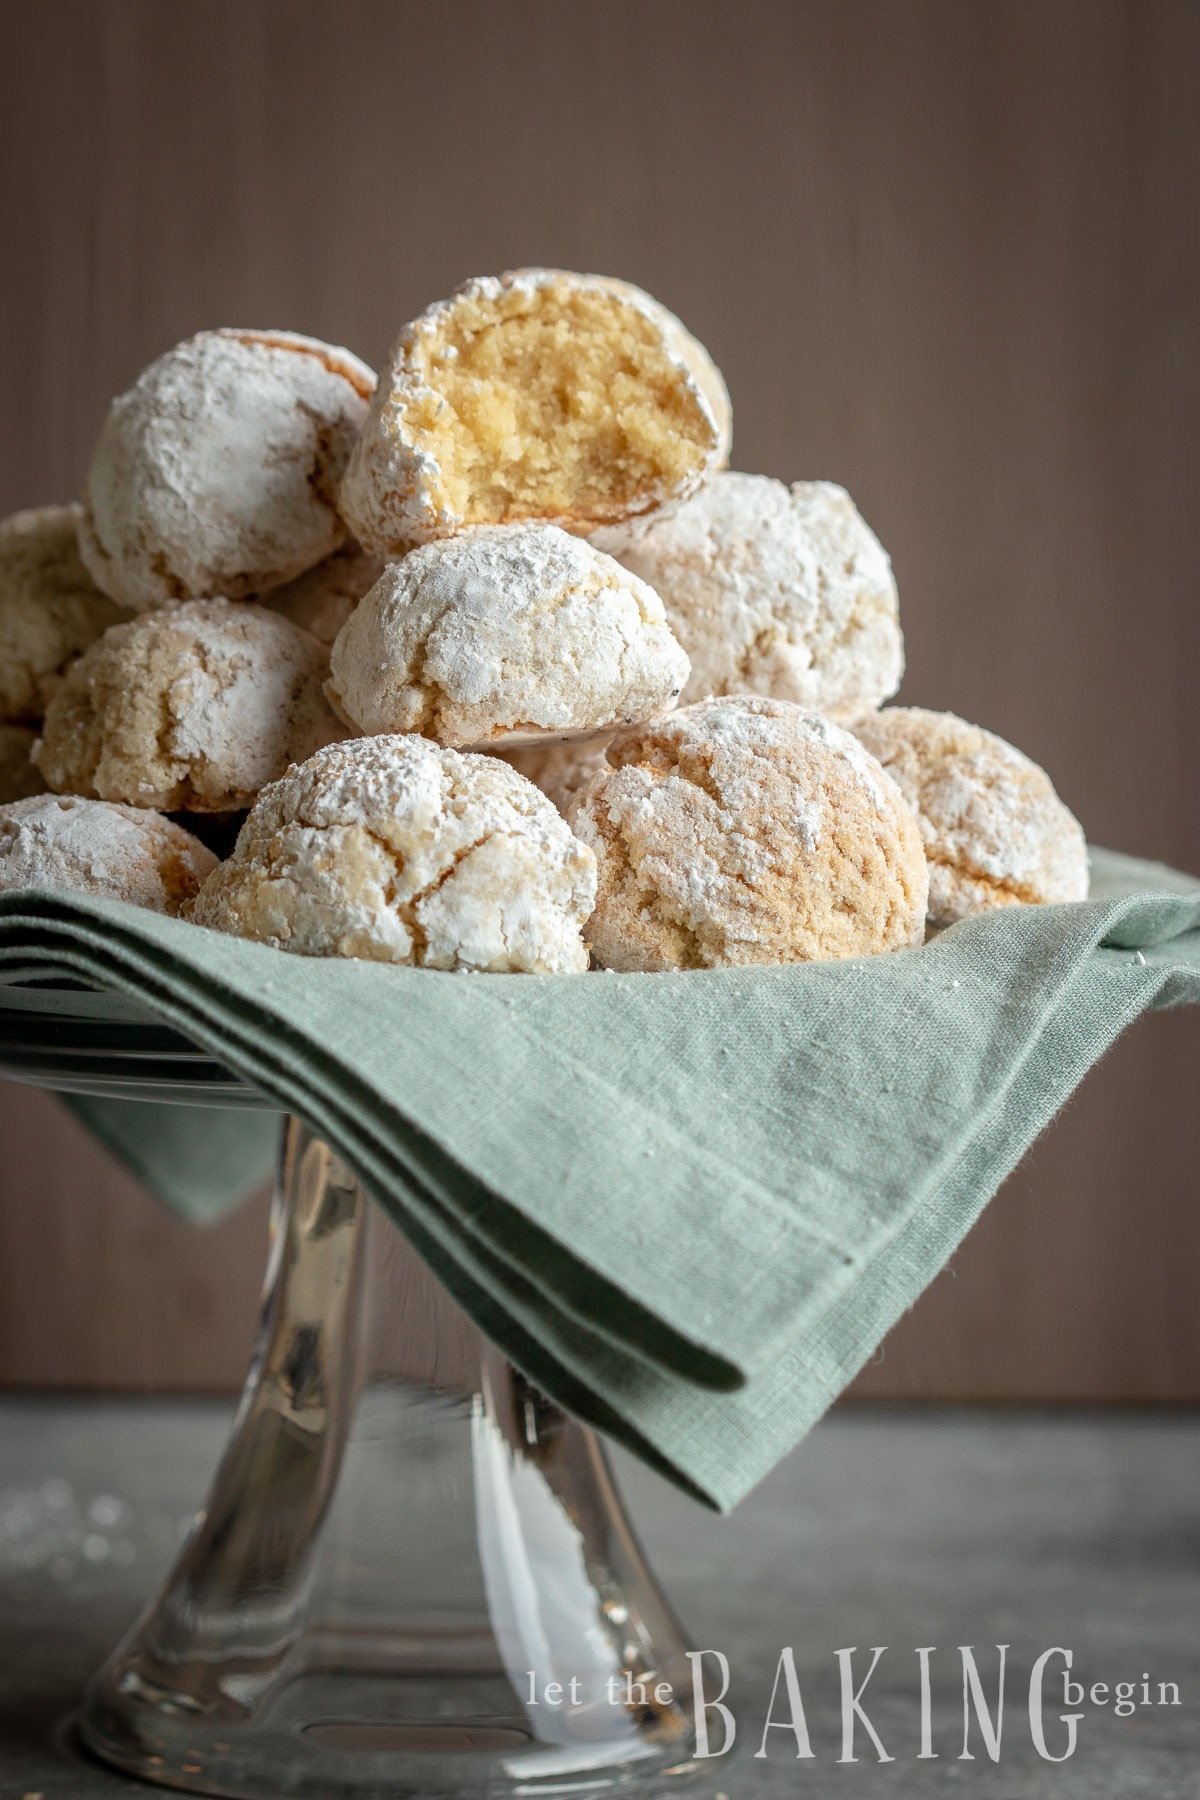 Amaretti Cookies are small gluten and dairy-free confections that are made with egg whites, almond flour and sugar. The cookies can range from crispy like biscotti, to almost chewy texture and have the most amazing almond flavor and aroma.